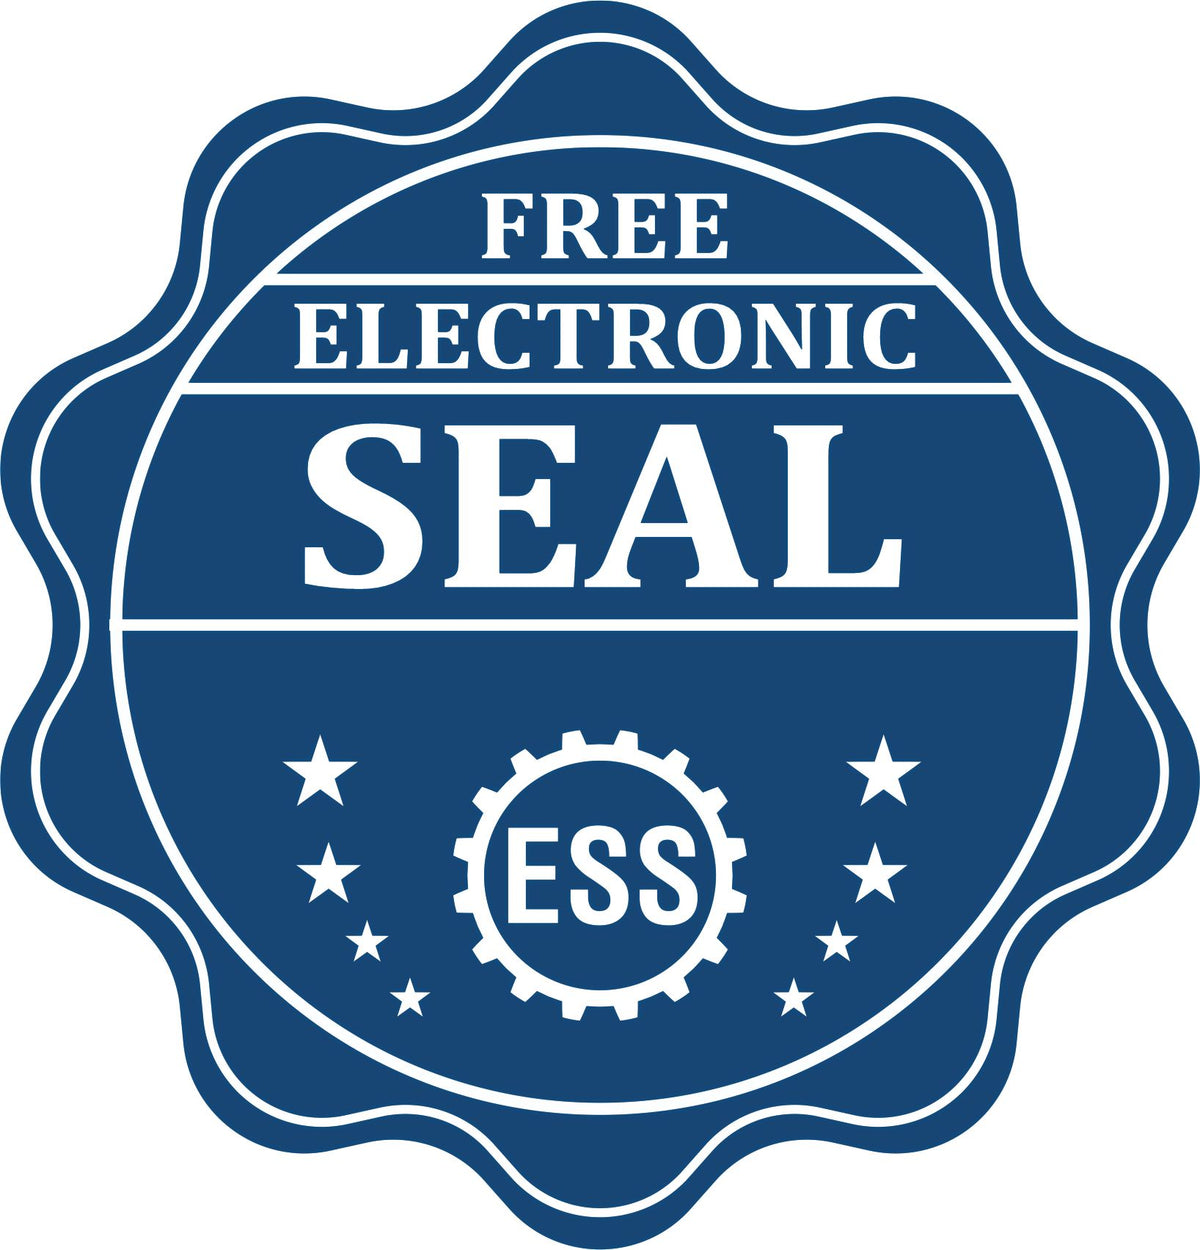 A badge showing a free electronic seal for the Slim Pre-Inked Nebraska Land Surveyor Seal Stamp with stars and the ESS gear on the emblem.